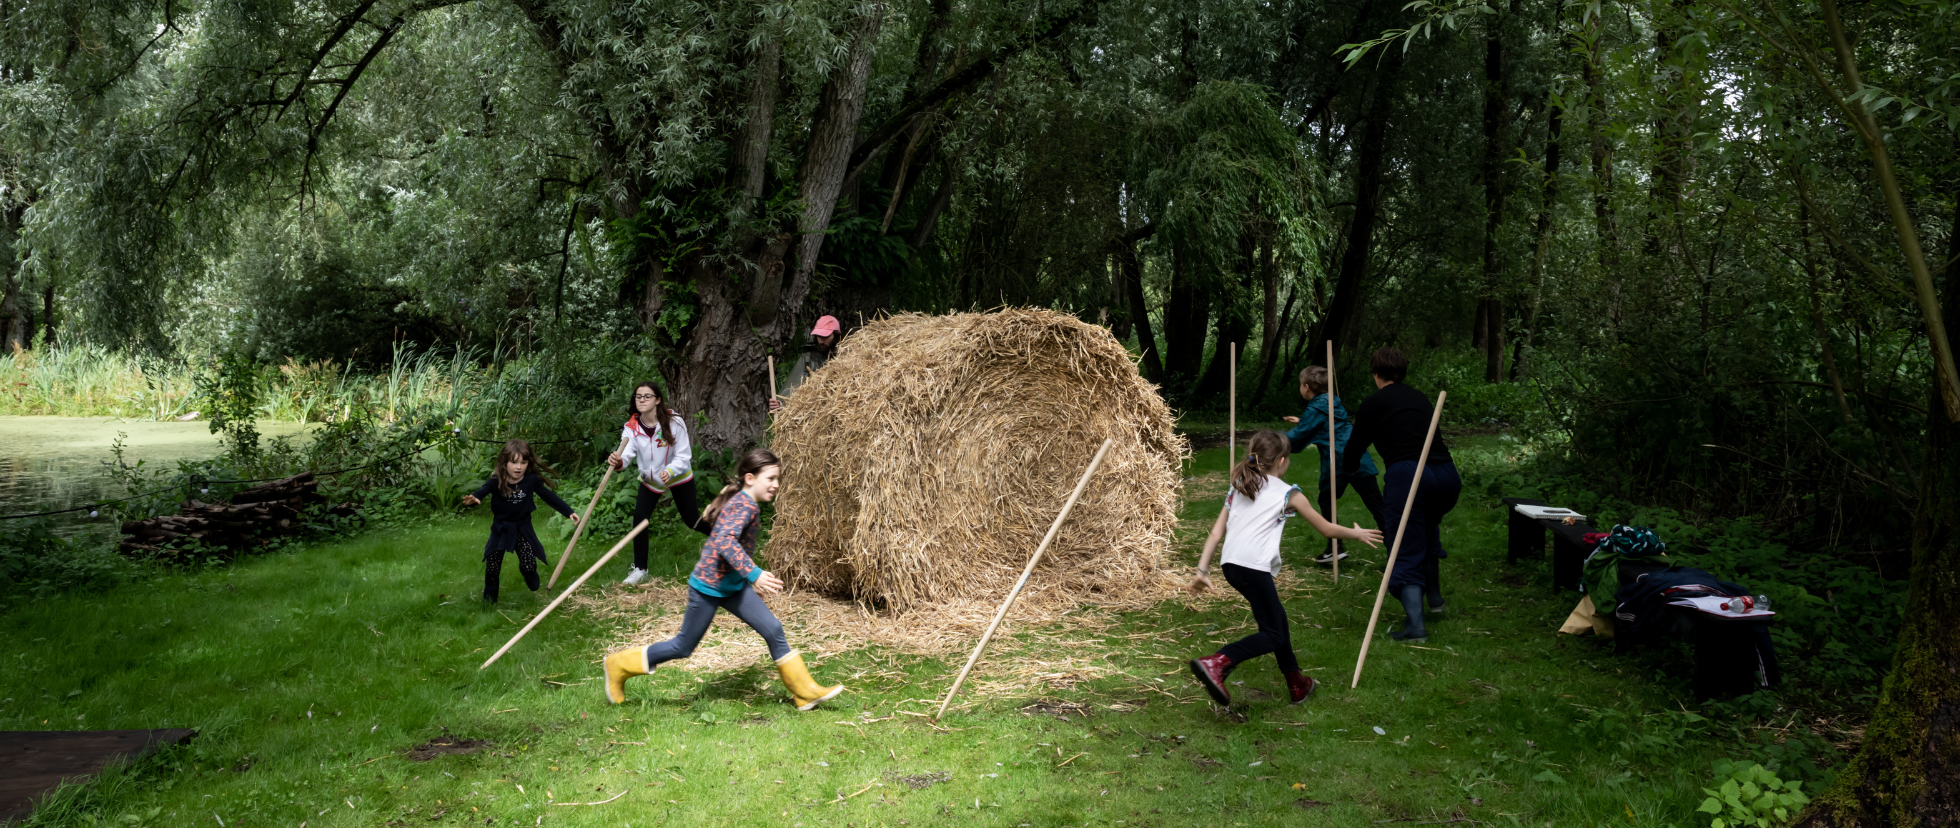 Childrens playing with hay stacks